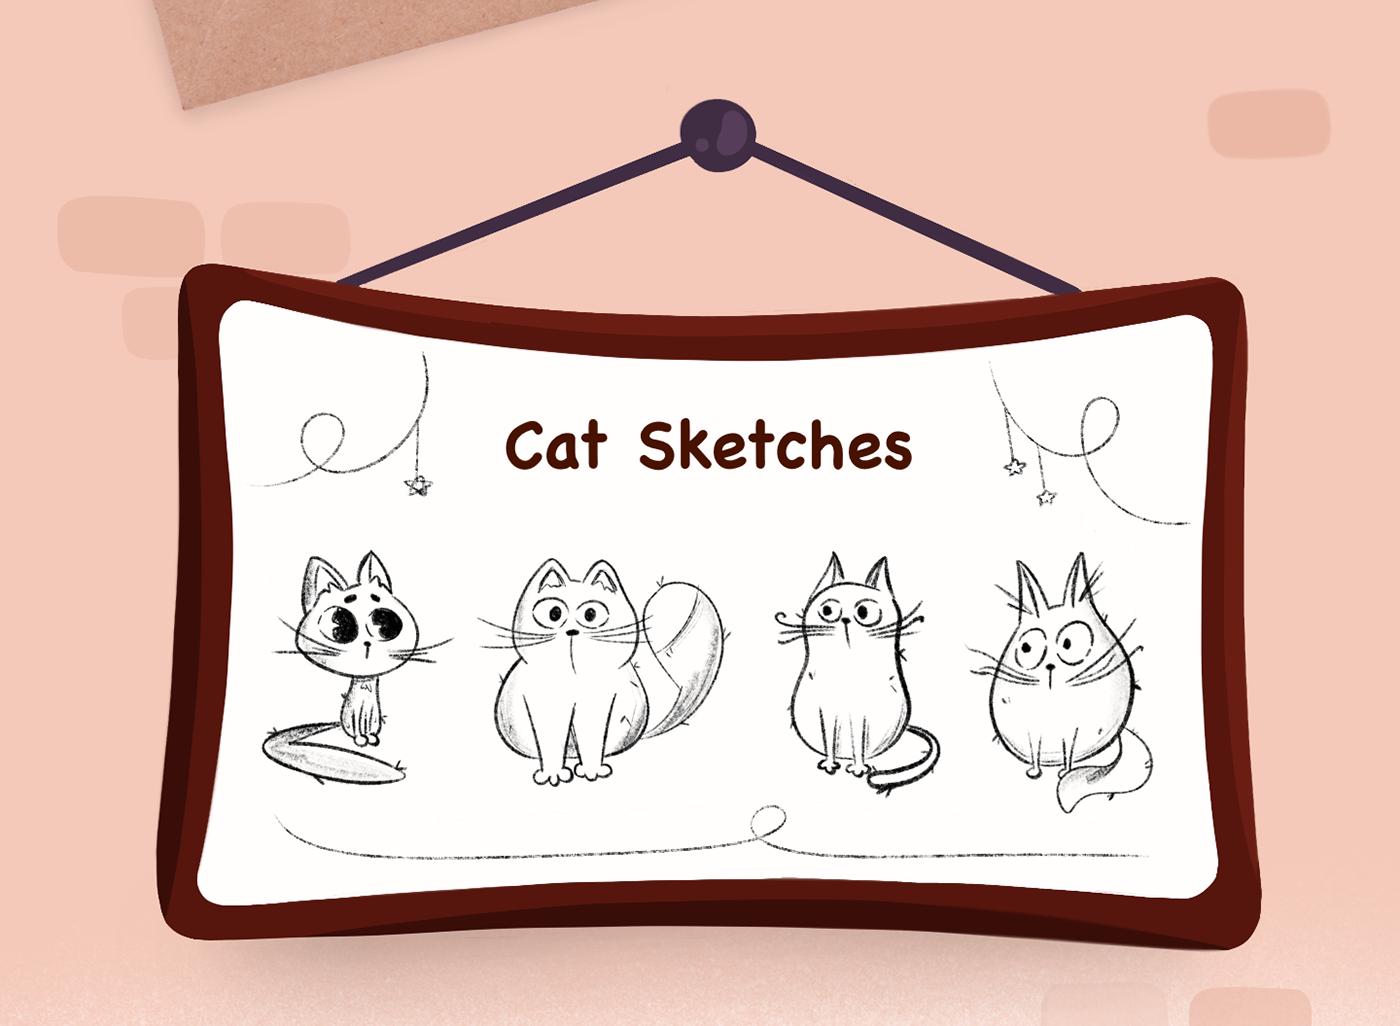 Development of cat character design. four sketches of a cat on a white background.

